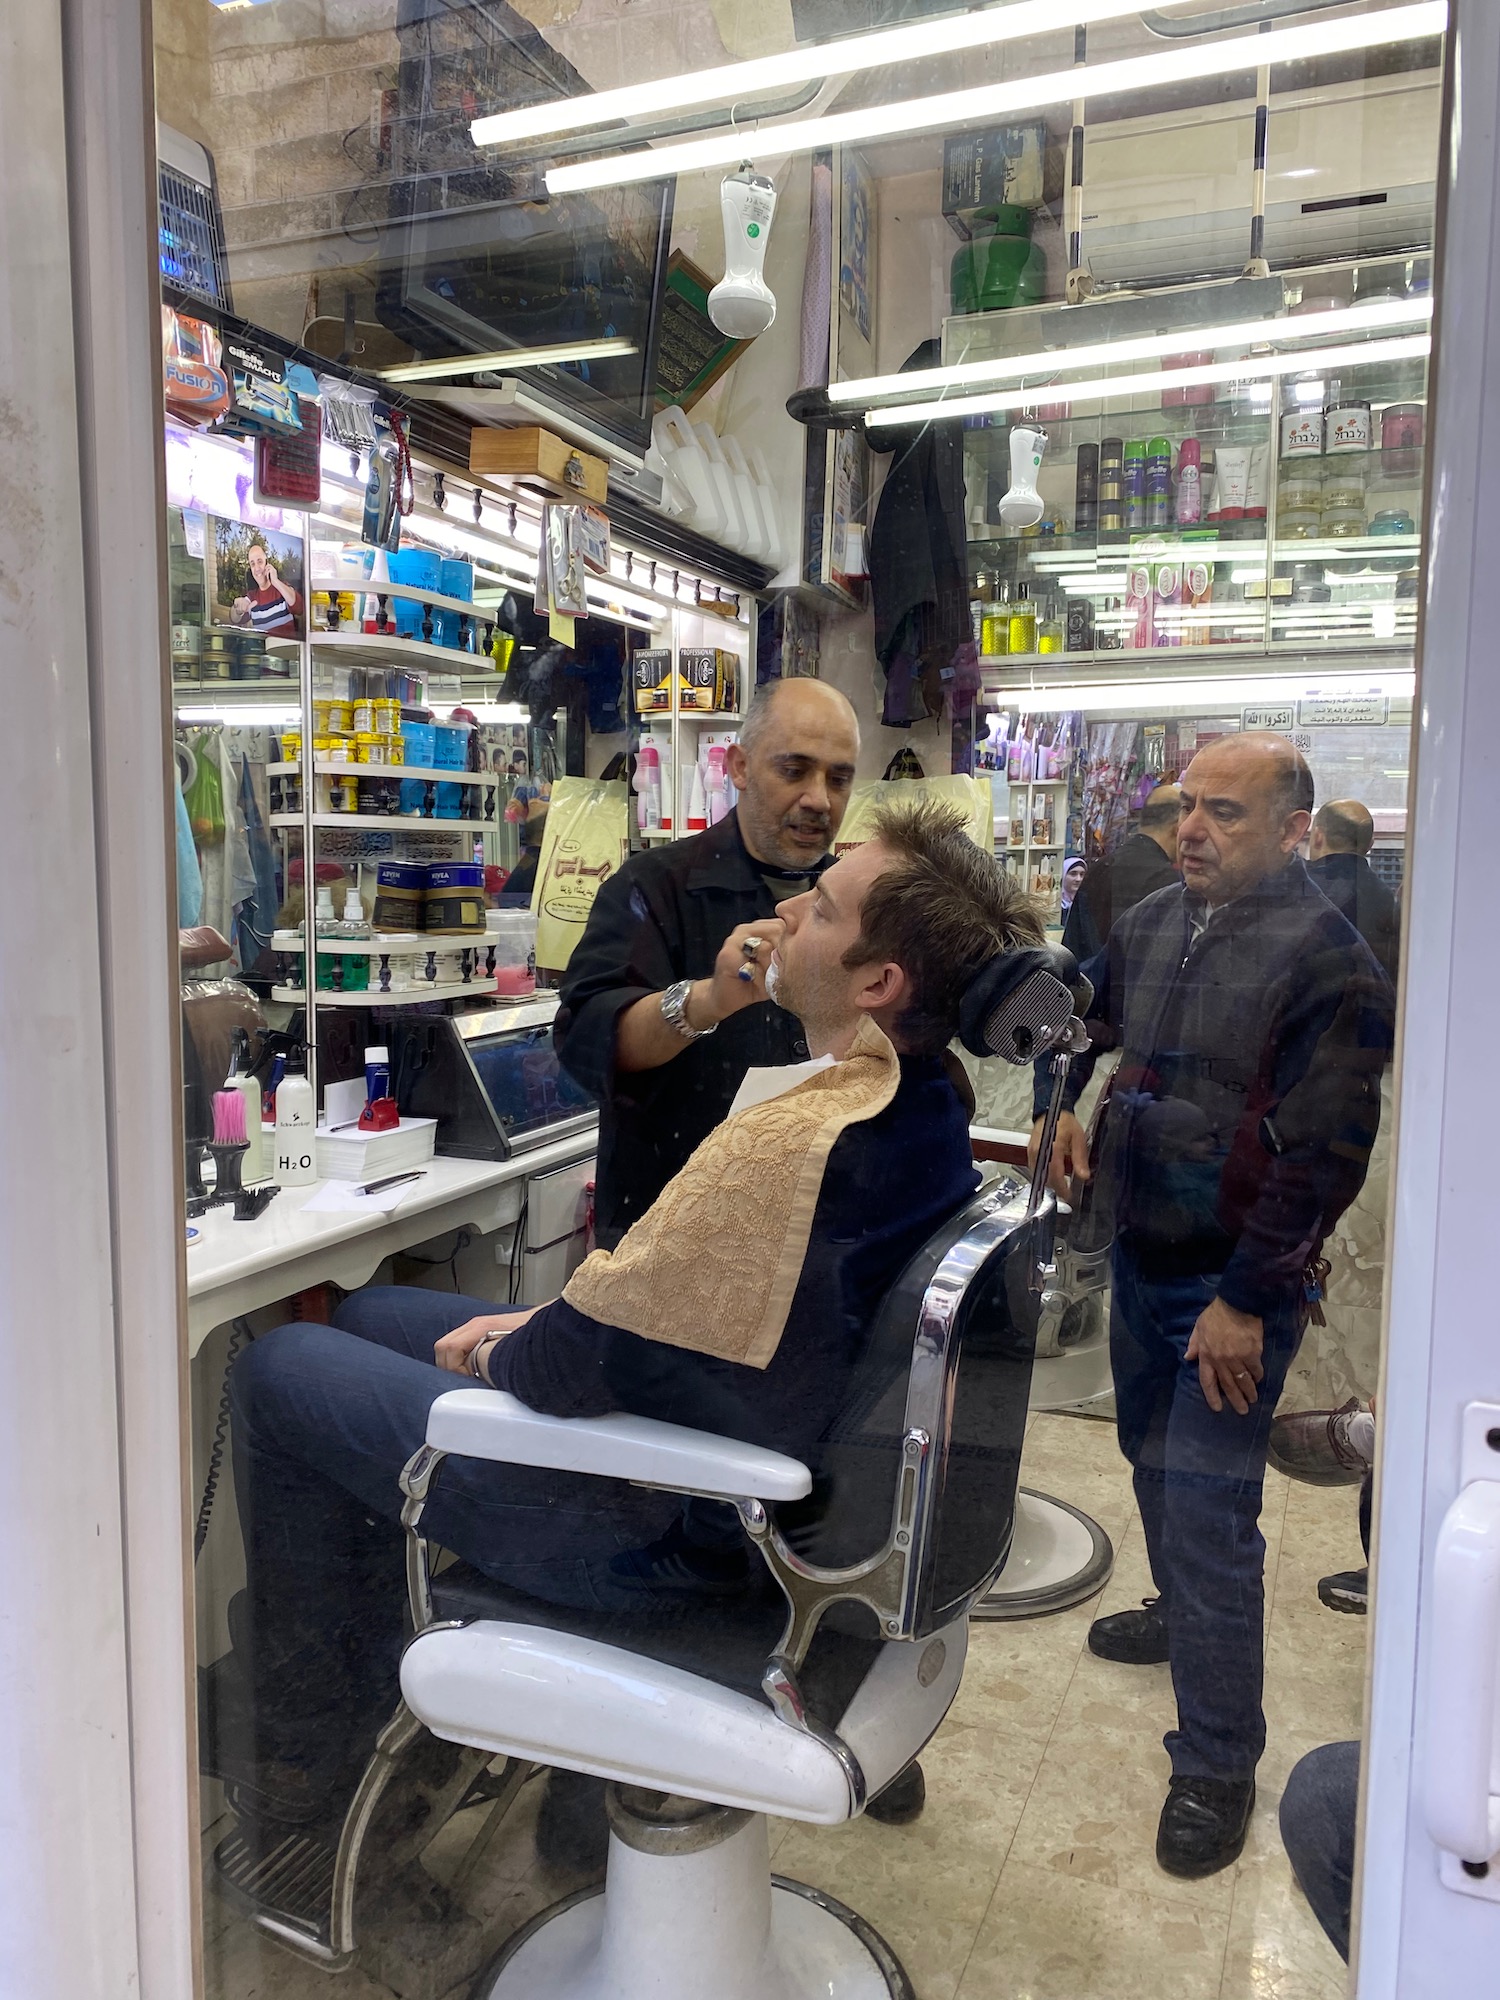 a man sitting in a chair in a barber shop